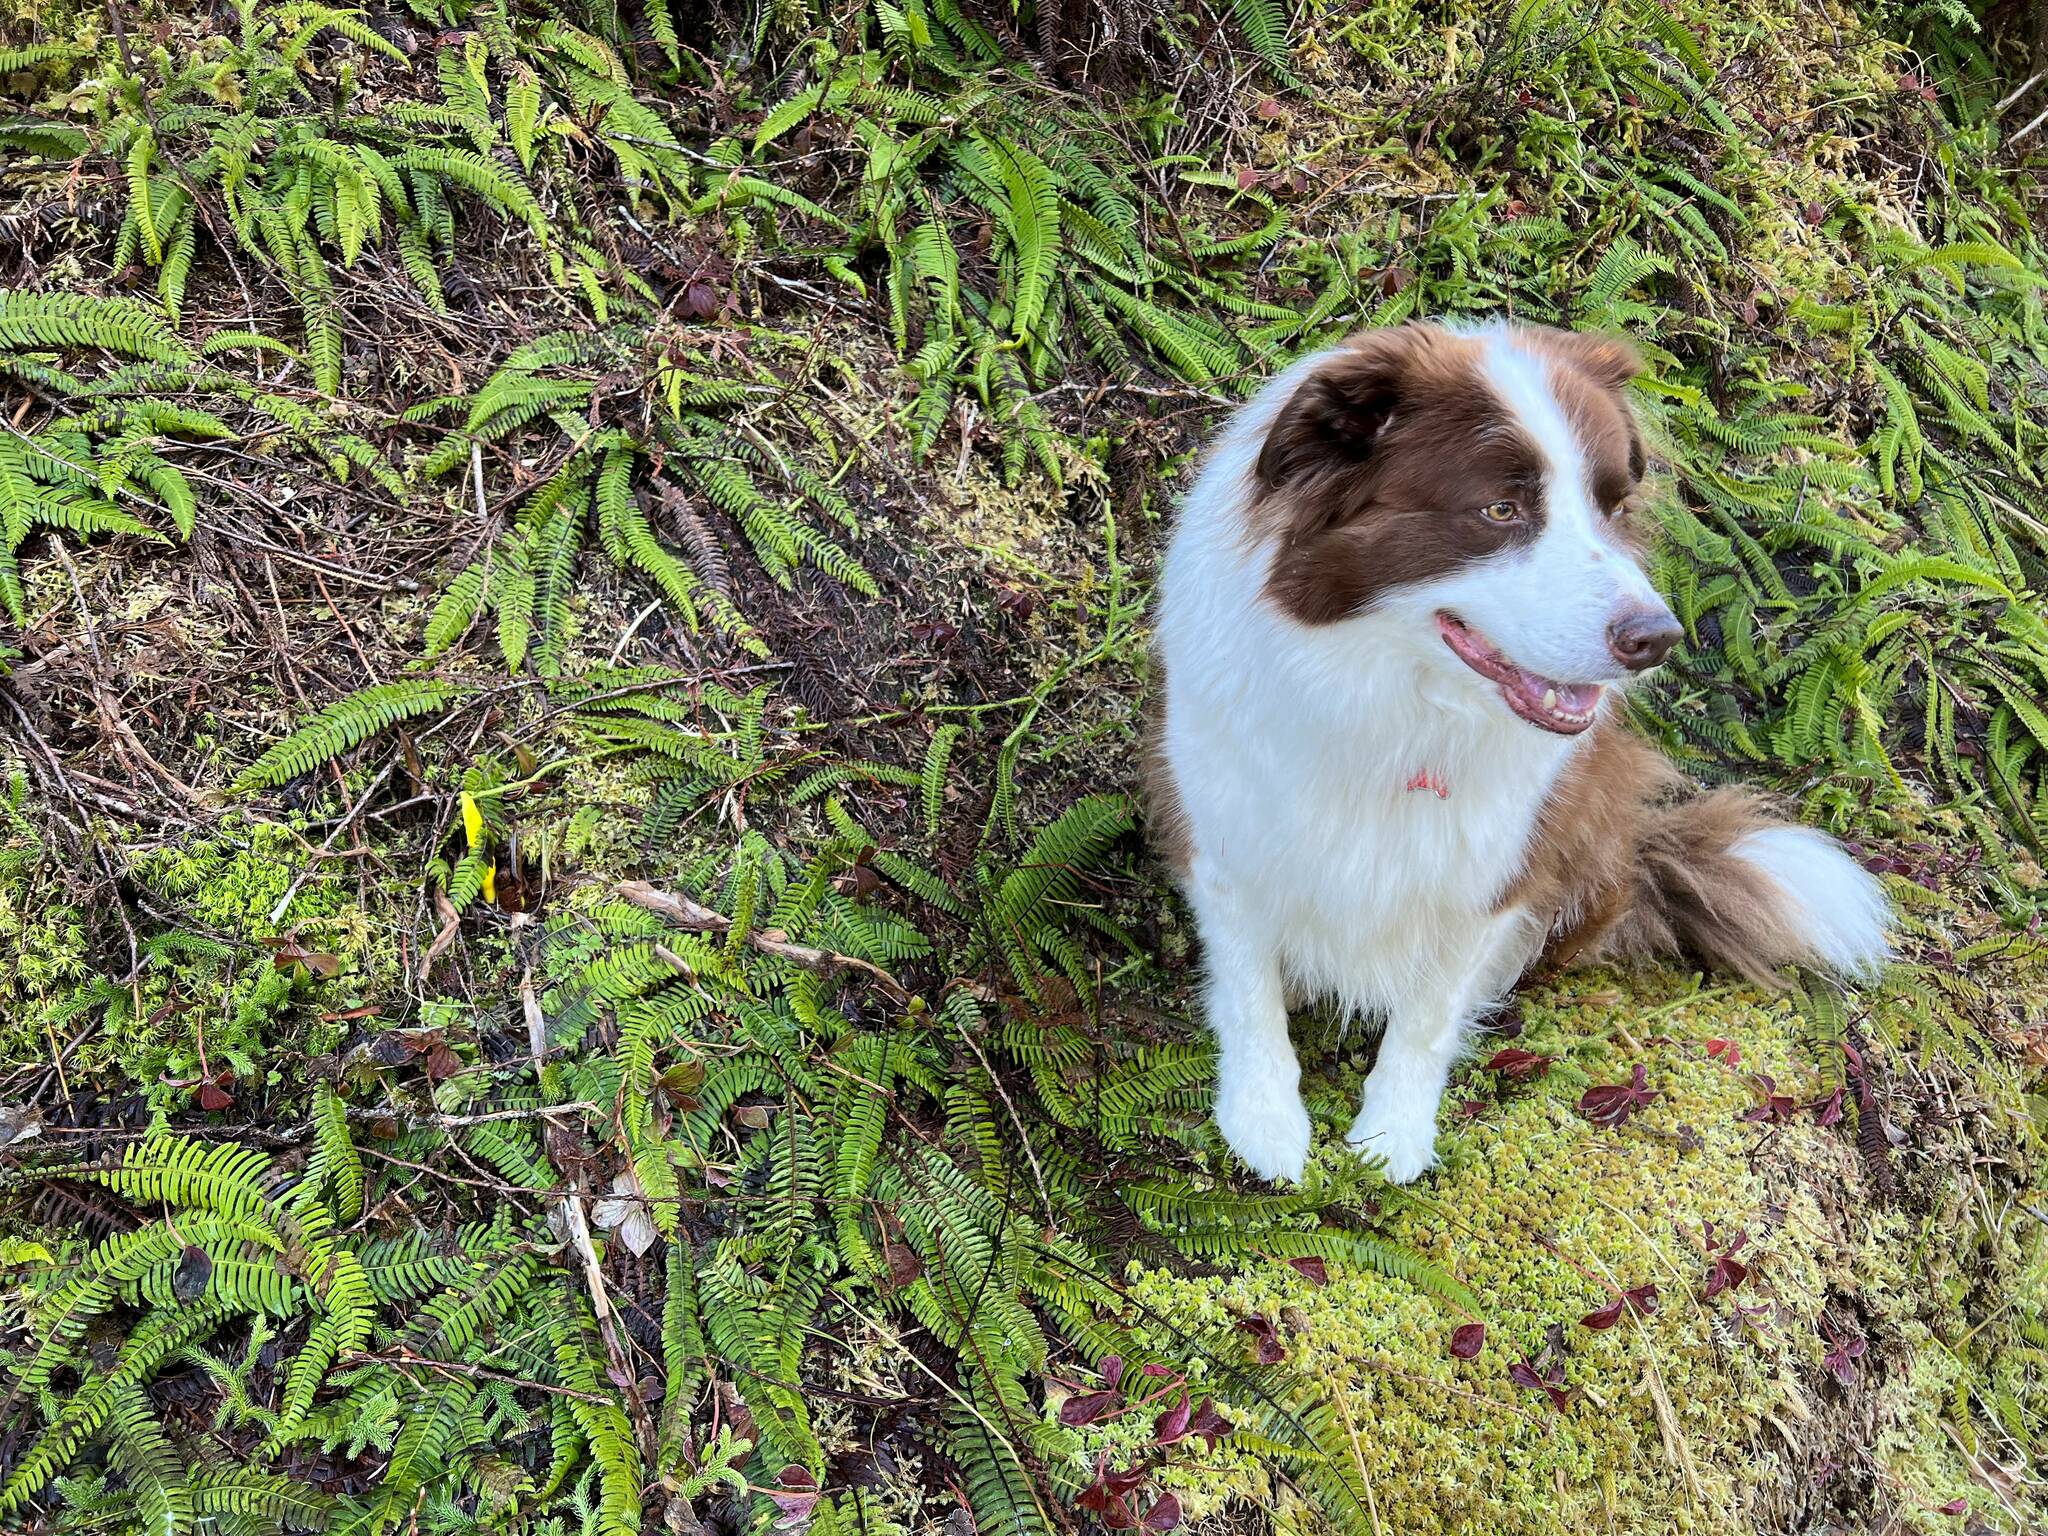 Oscar inspects the skunk cabbage in the Tongass National Forest in Wrangell. (Vivian Faith Prescott / For the Capital City Weekly)